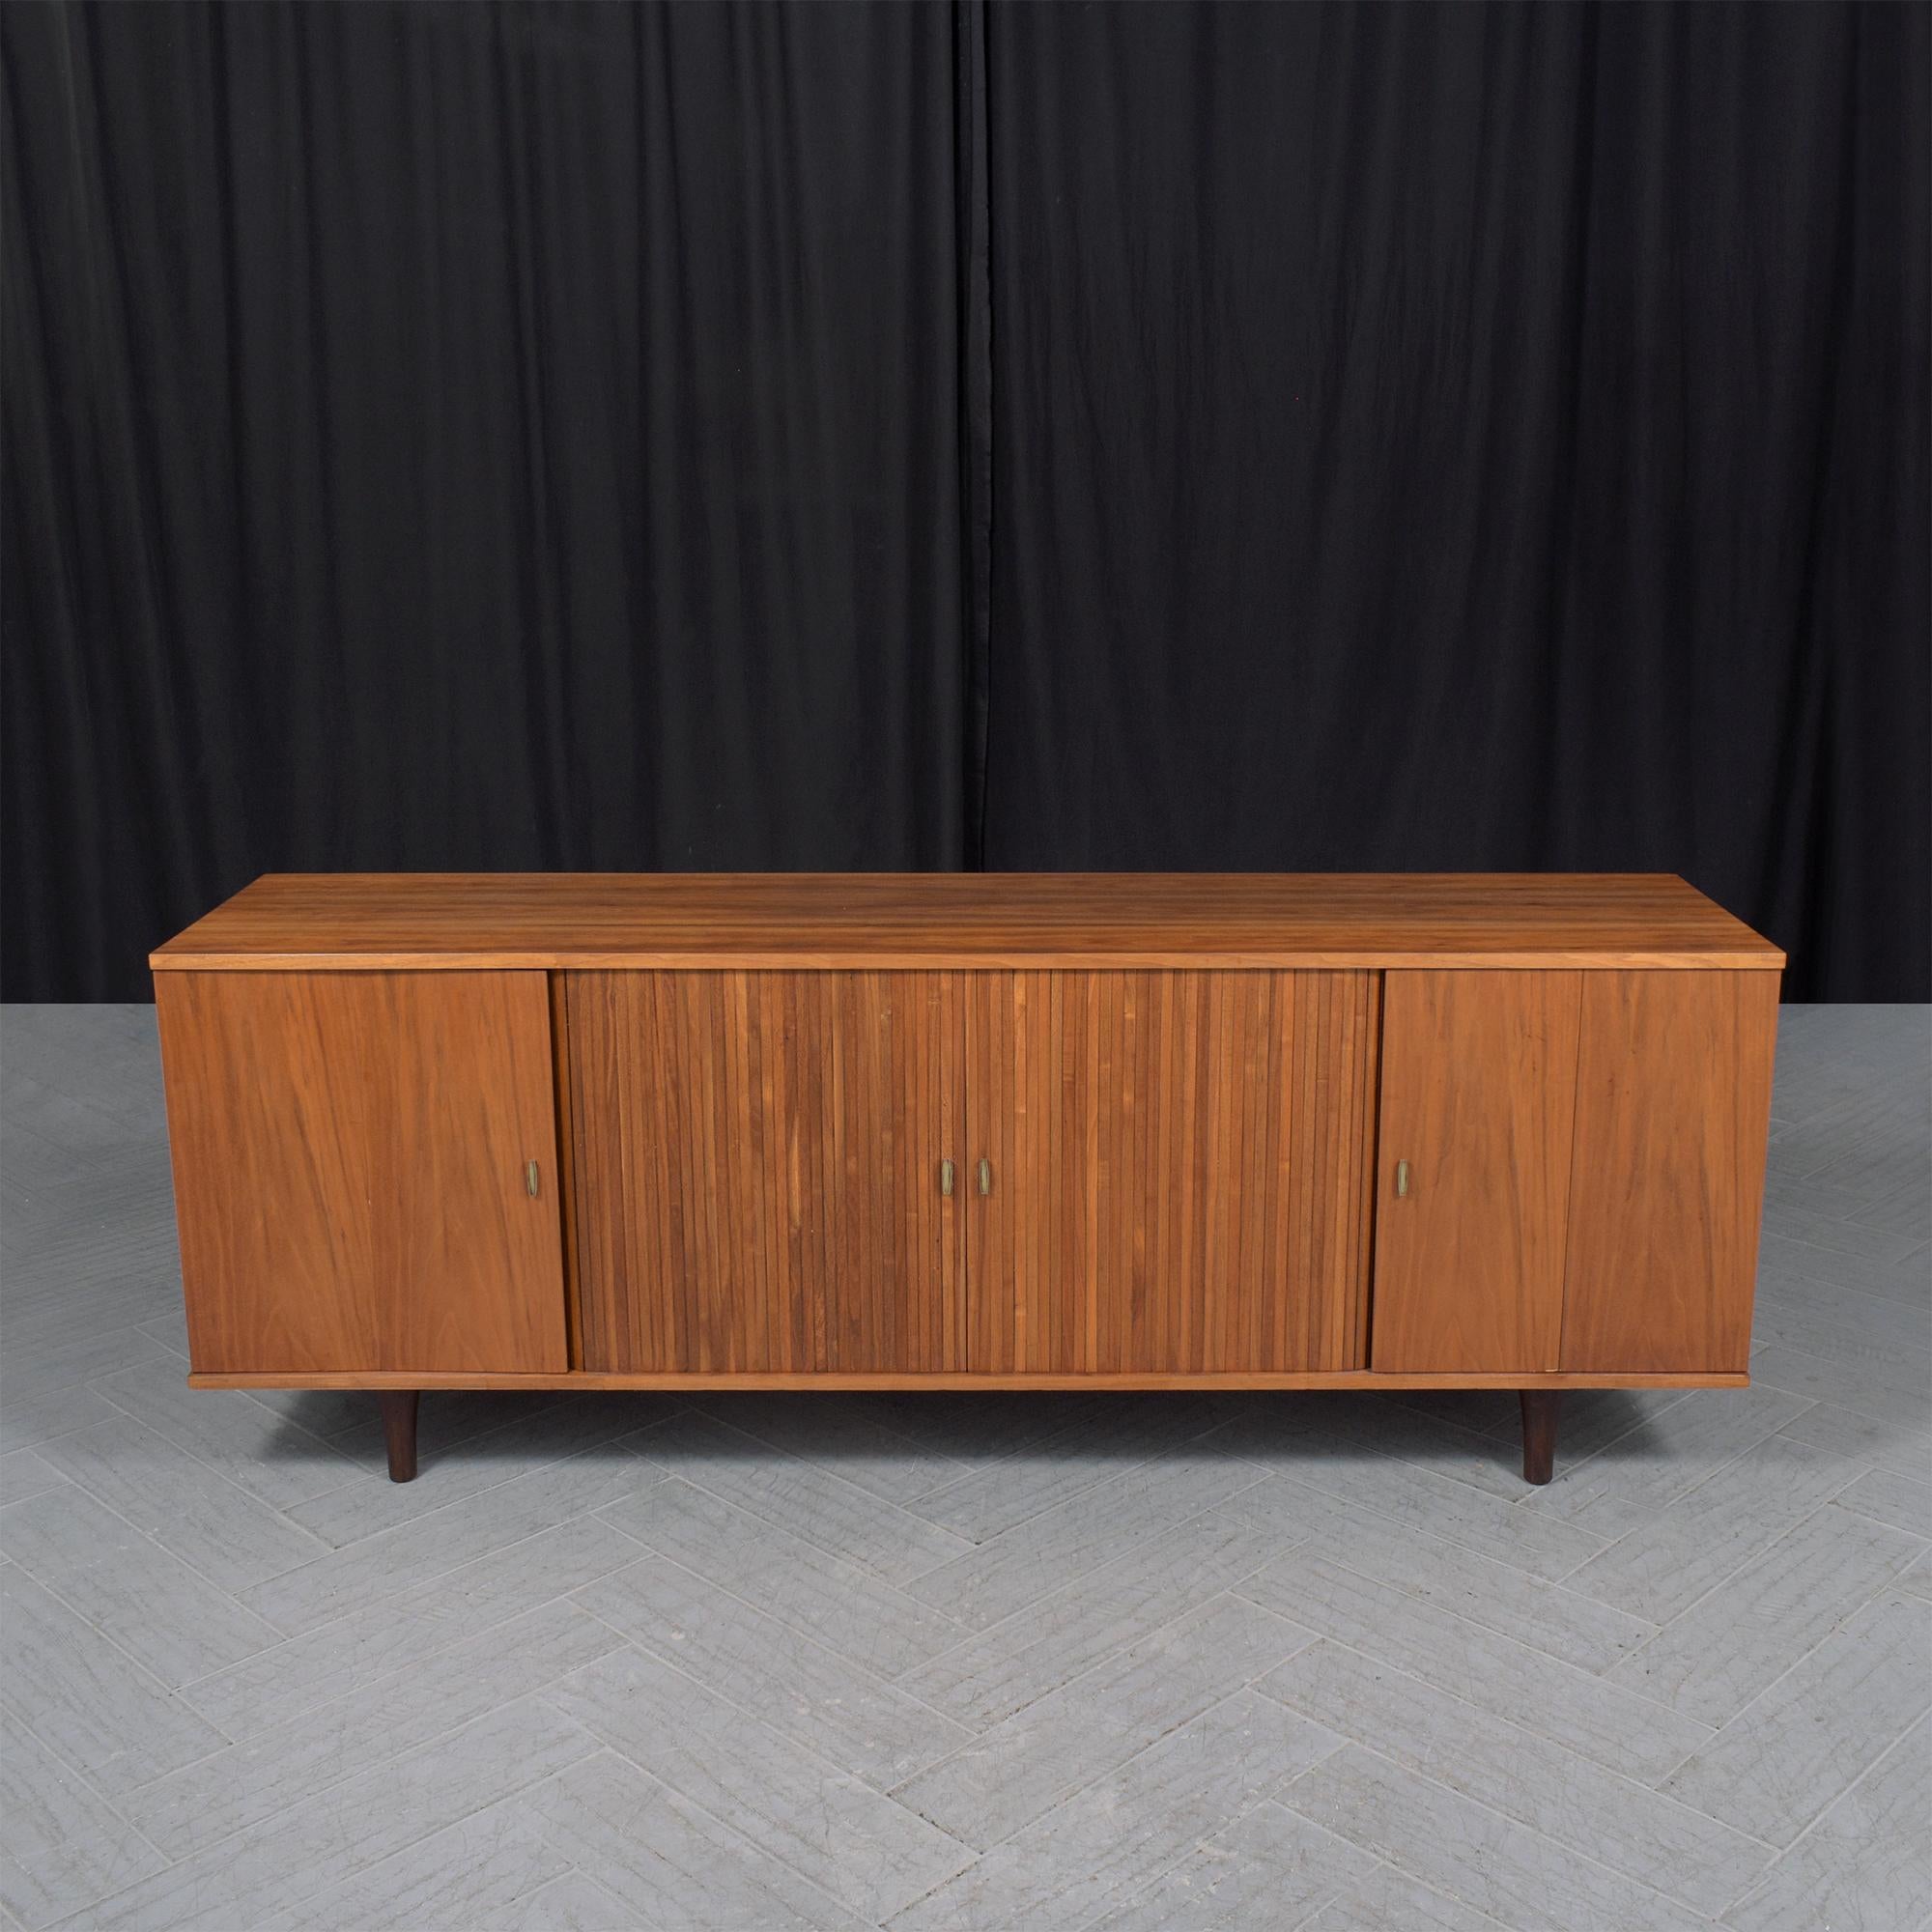 Discover the allure of mid-century design with our exceptional mid-century modern credenza, a striking piece from the 1960s that exemplifies the era's timeless design and expert craftsmanship. In great condition, this vintage server has been